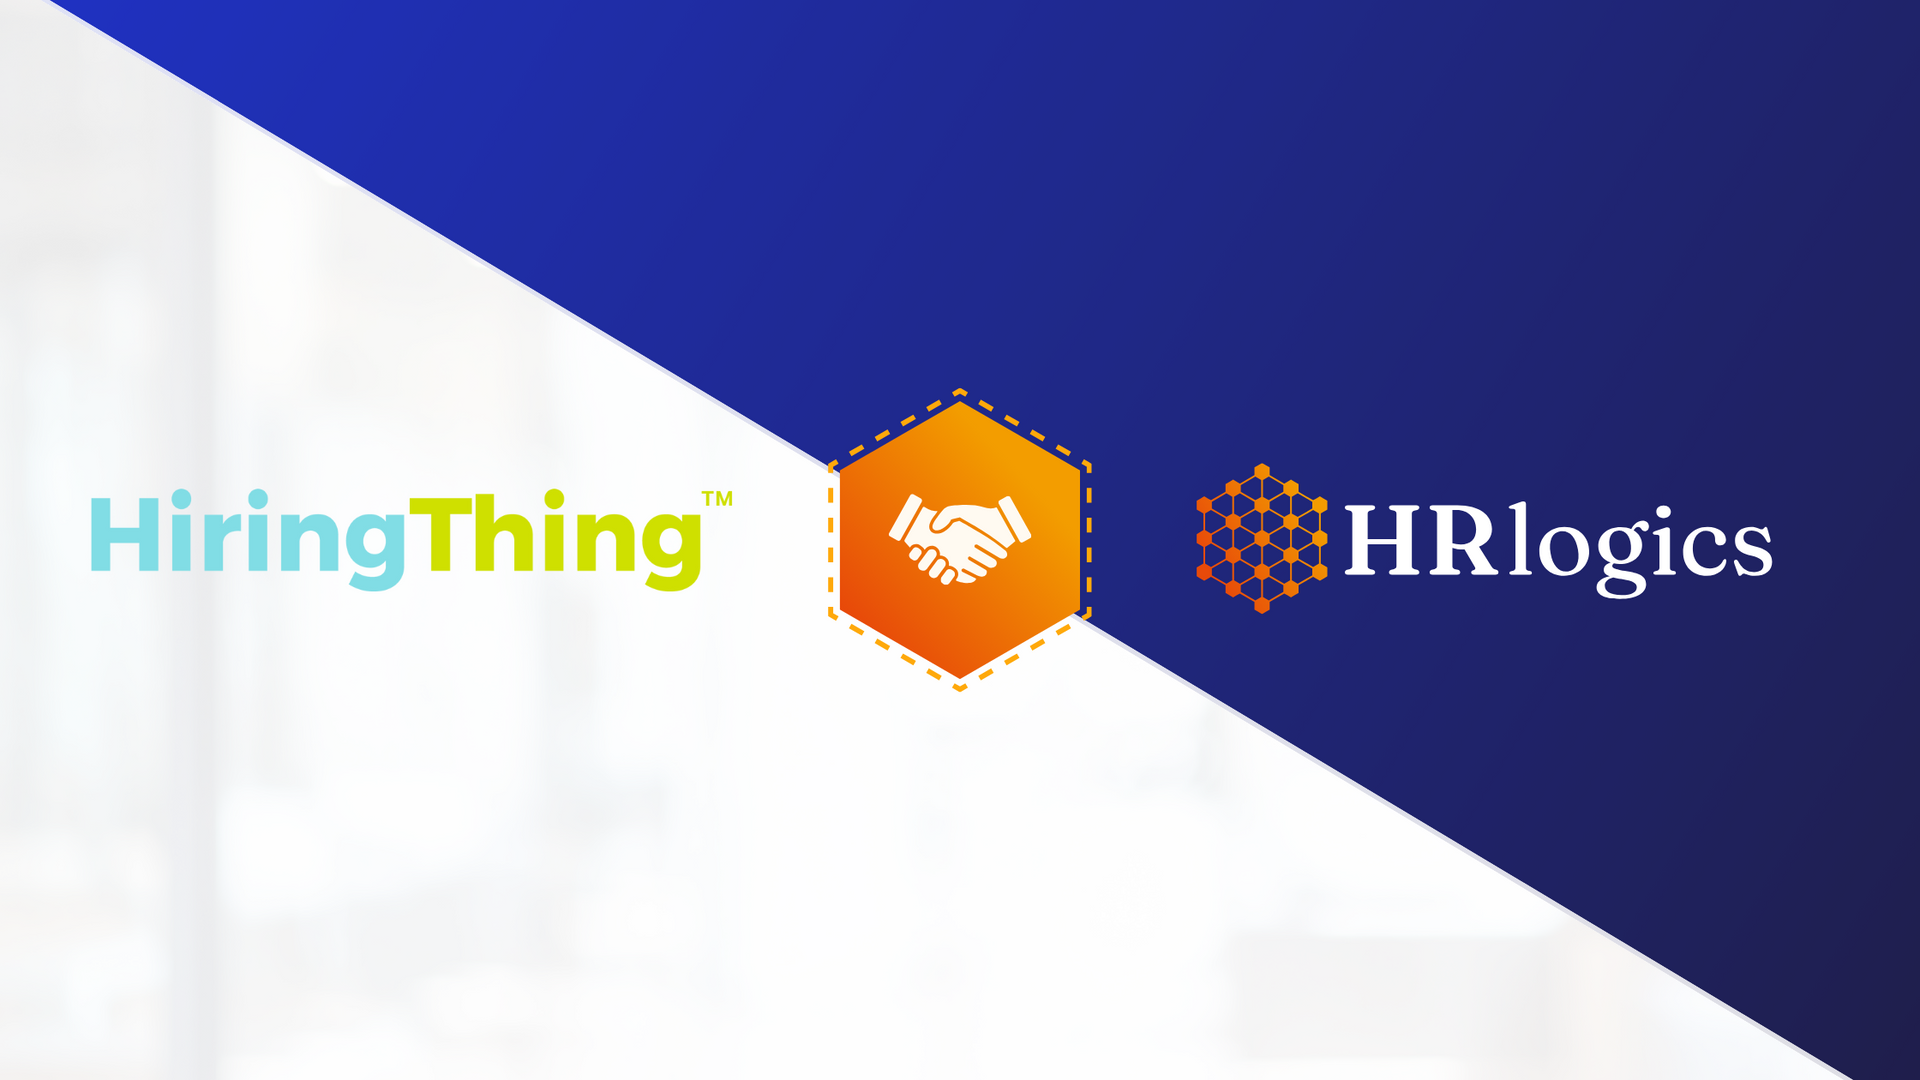 HiringThing and HRlogics Partner to Enhance Compliant Hiring Practices